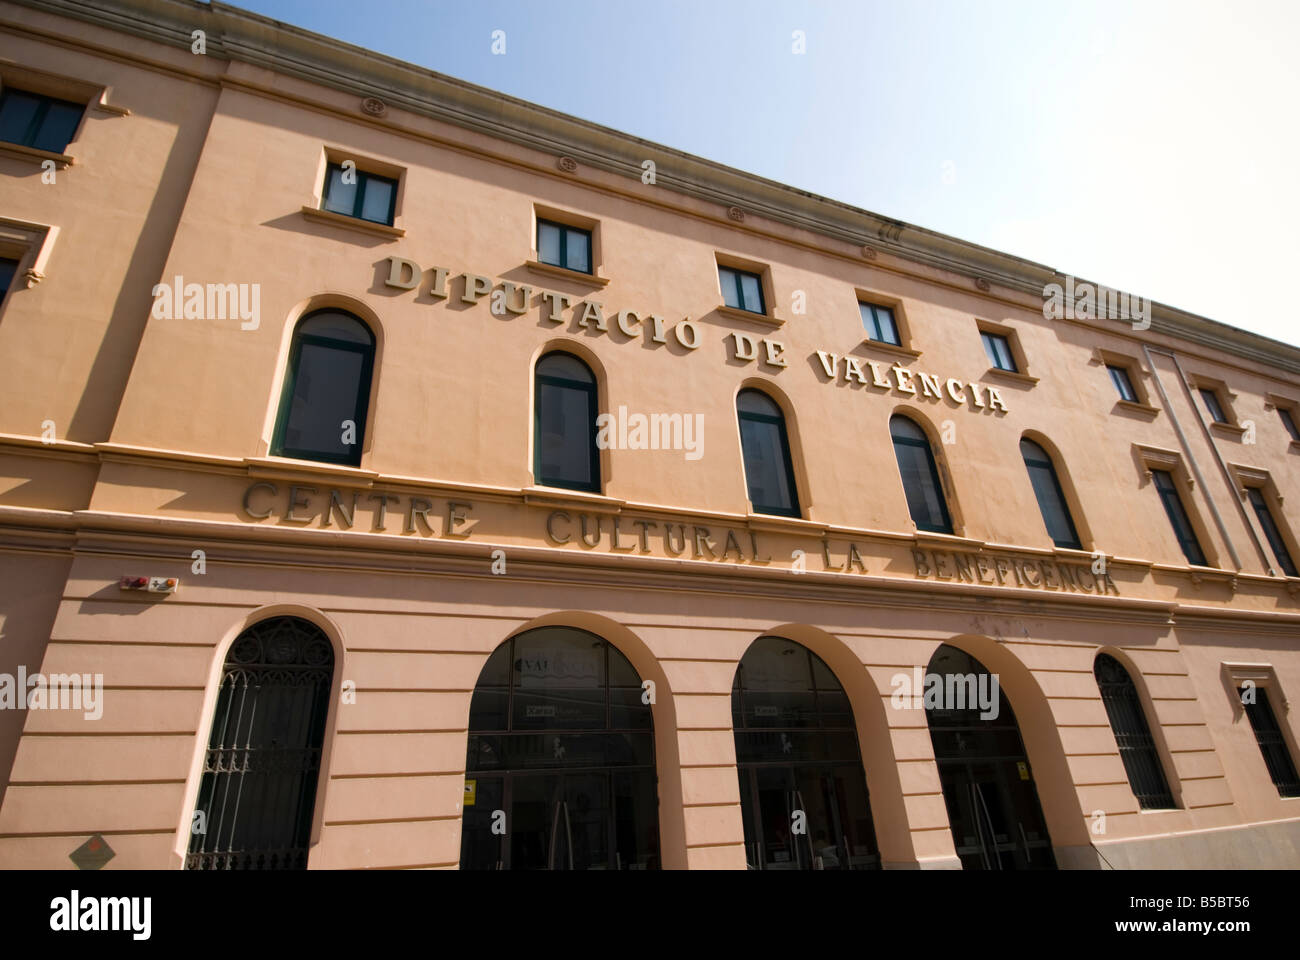 Prehistoric and Ethnology Museum building in Valencia Spain Stock Photo